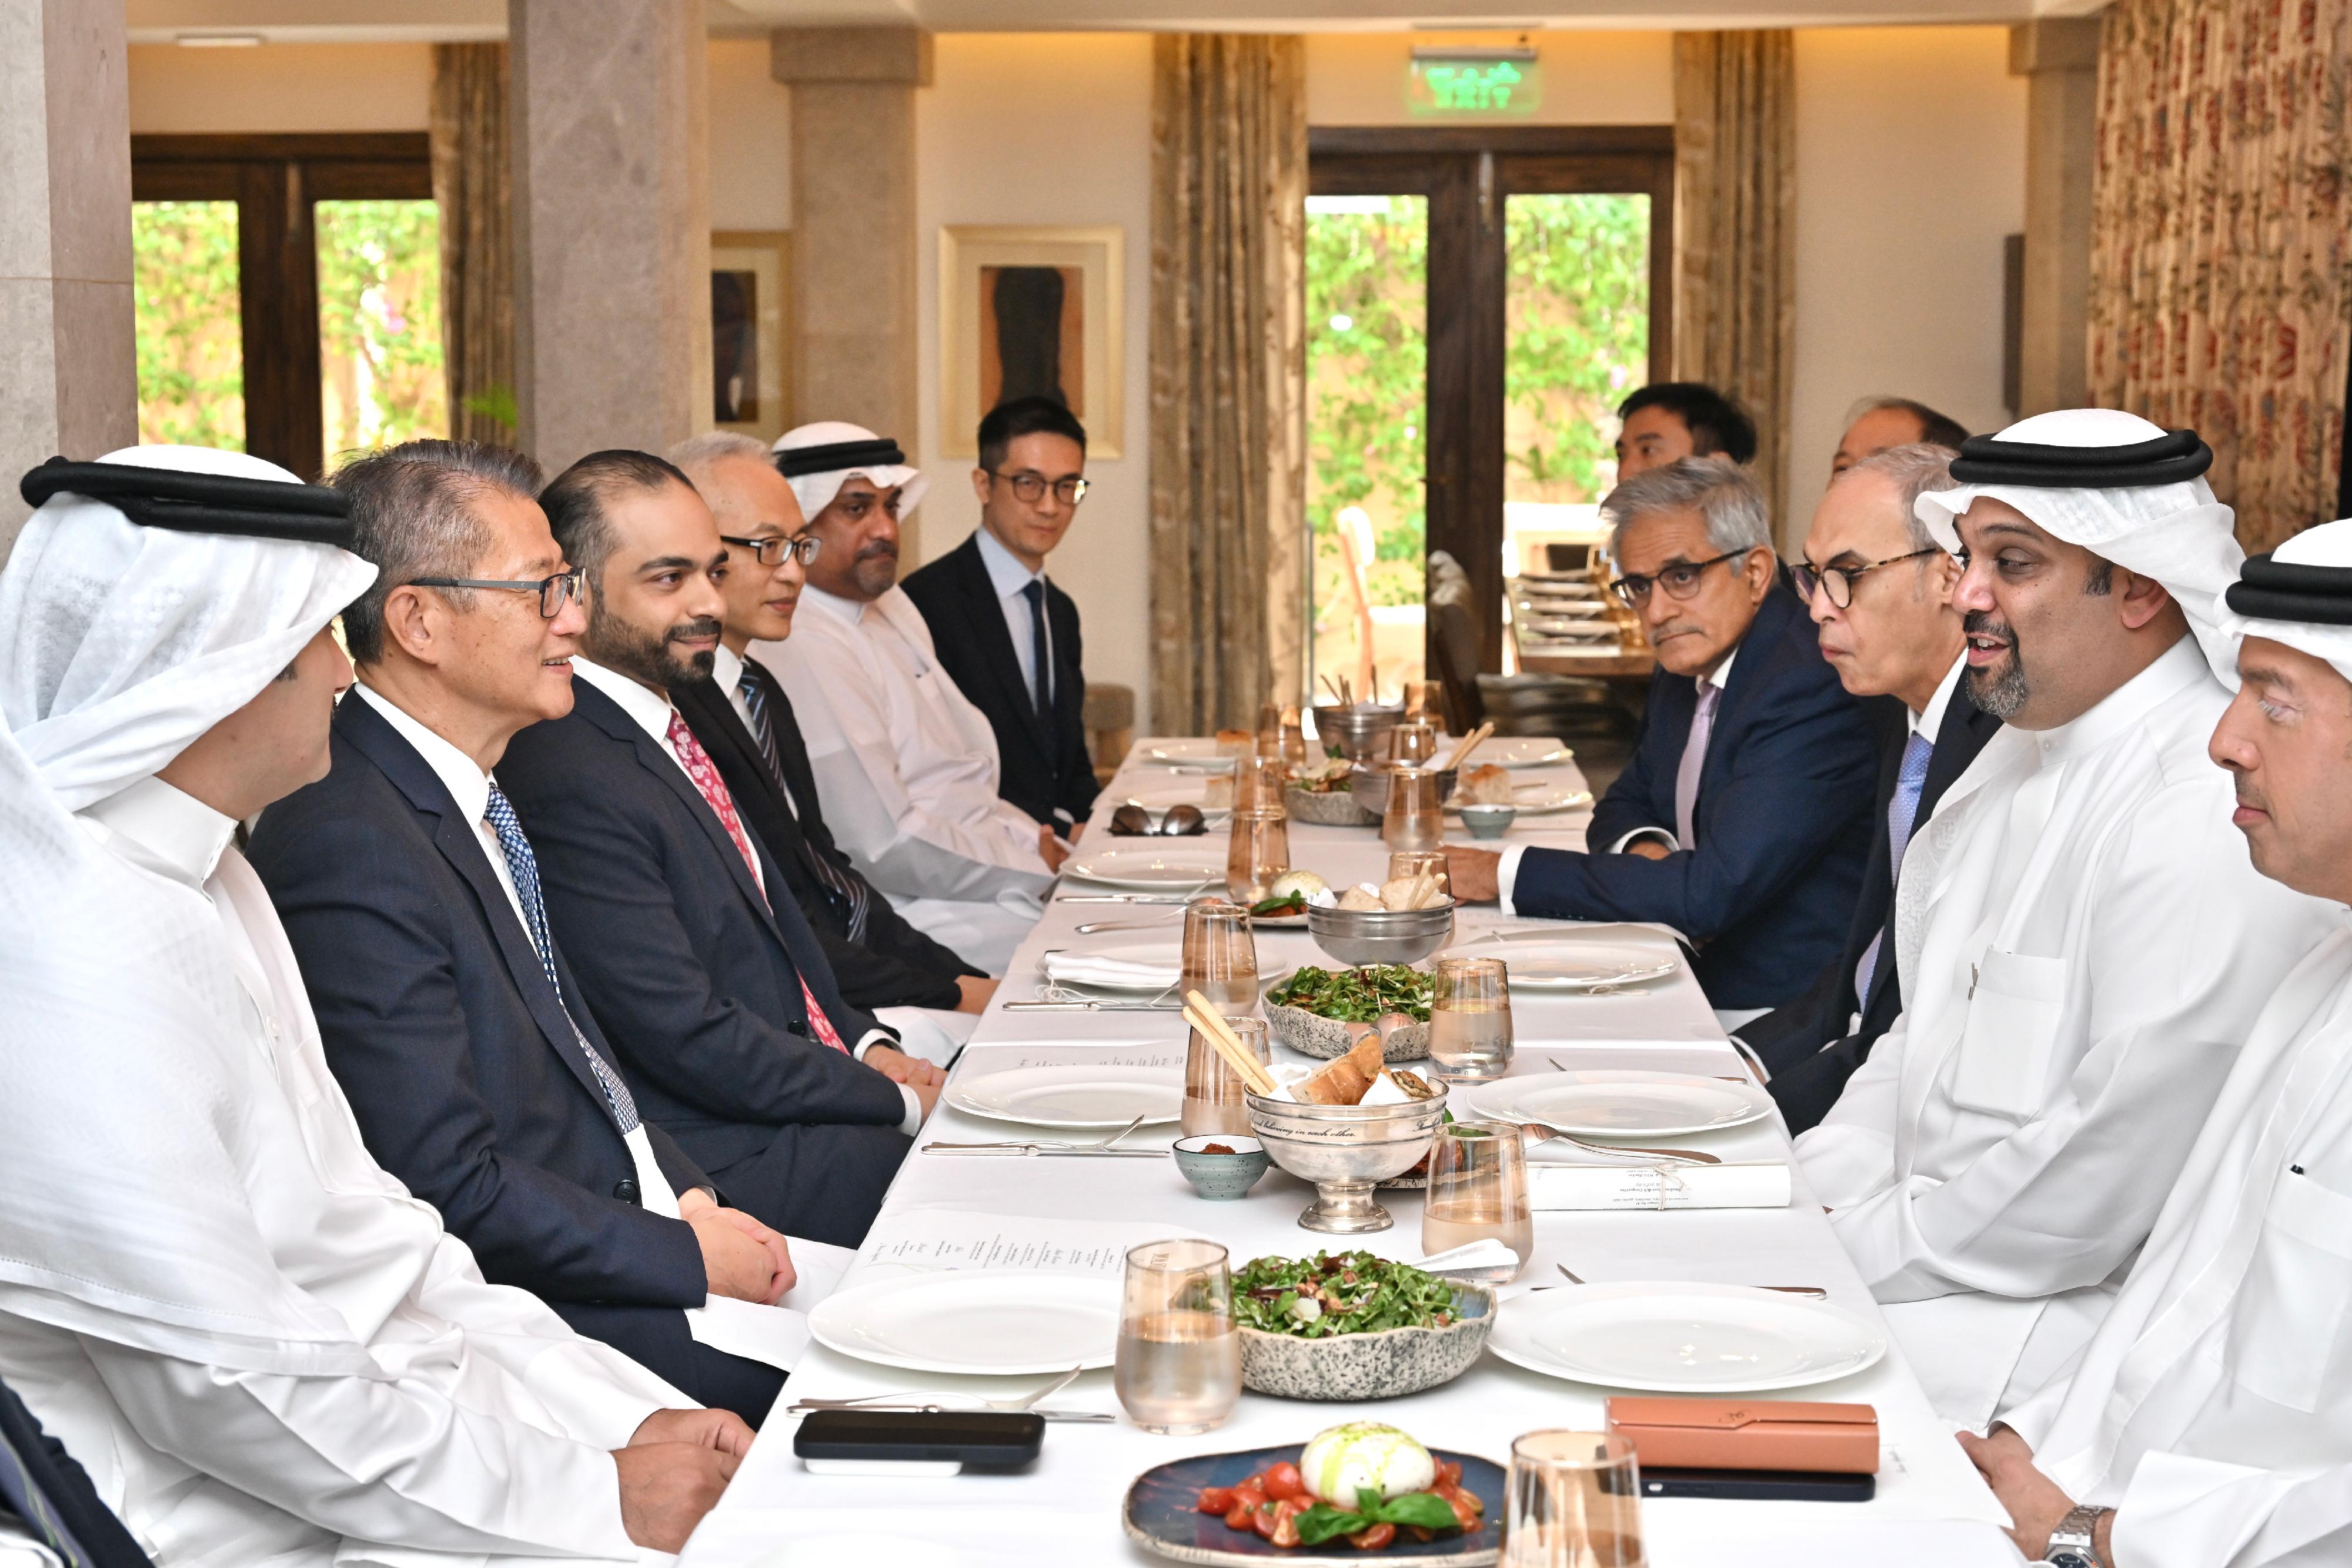 The Financial Secretary, Mr Paul Chan, kick started his official visit to Bahrain on October 23 (Bahrain time).  Photo shows Mr Chan (second left) having a luncheon meeting with the Minister of Finance and National Economy, Sheikh Salman bin Khalifa Al Khalifa (second right).